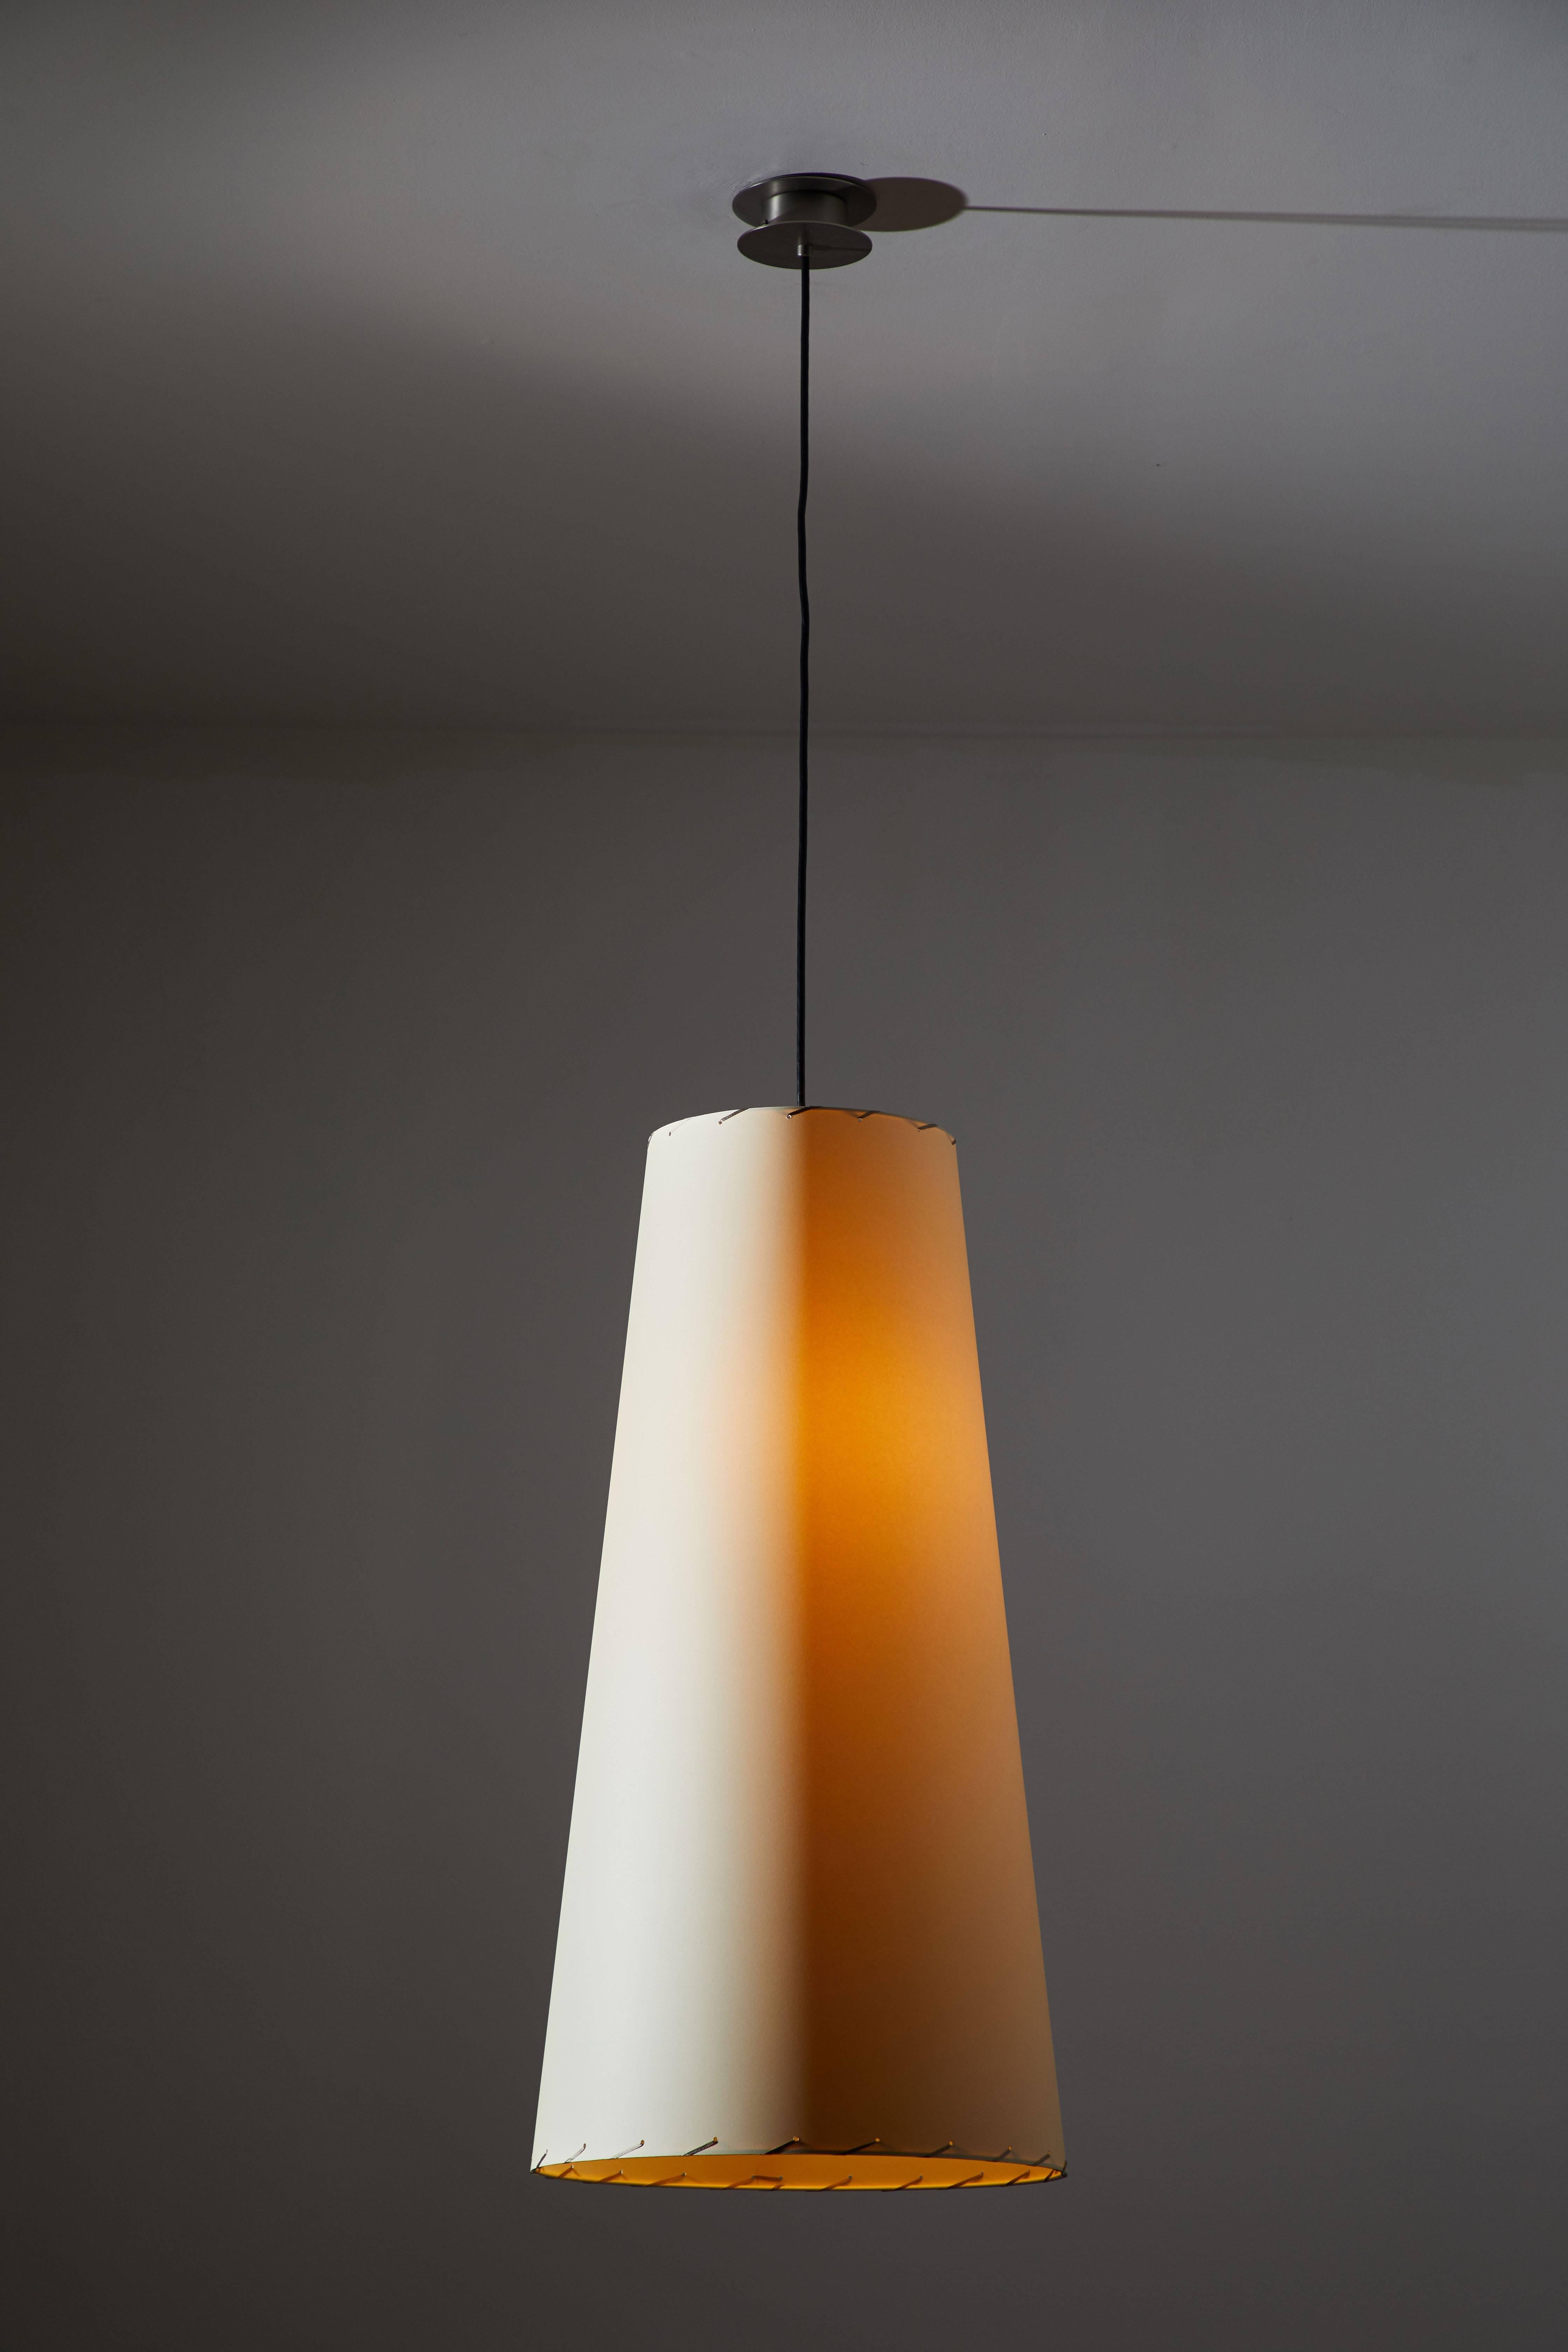 GT4 pendant lamp by Gabriel Ordeig Cole for Santa & Cole. This re-edition is designed and manufactured in Barcelona, Spain. Originally designed for a famous Barcelona bar from the 1980s. Large cone-shaped, woven cardboard shade typically utilized in